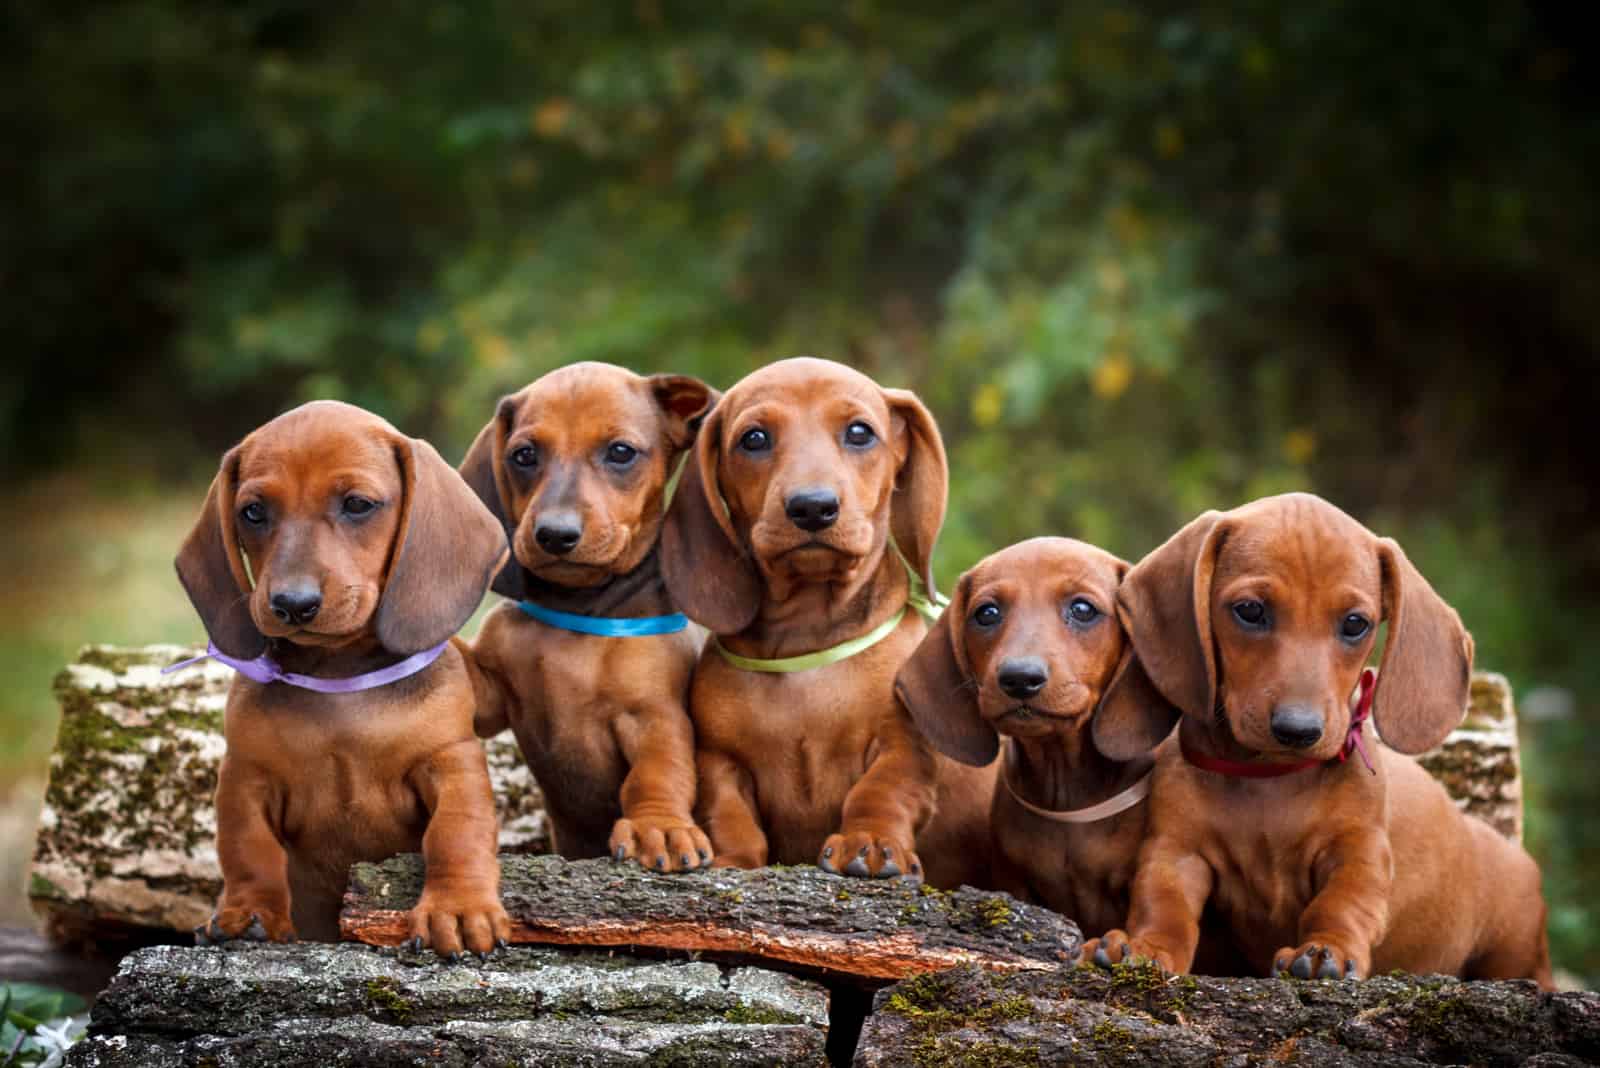 Dachshund puppies standing on wood